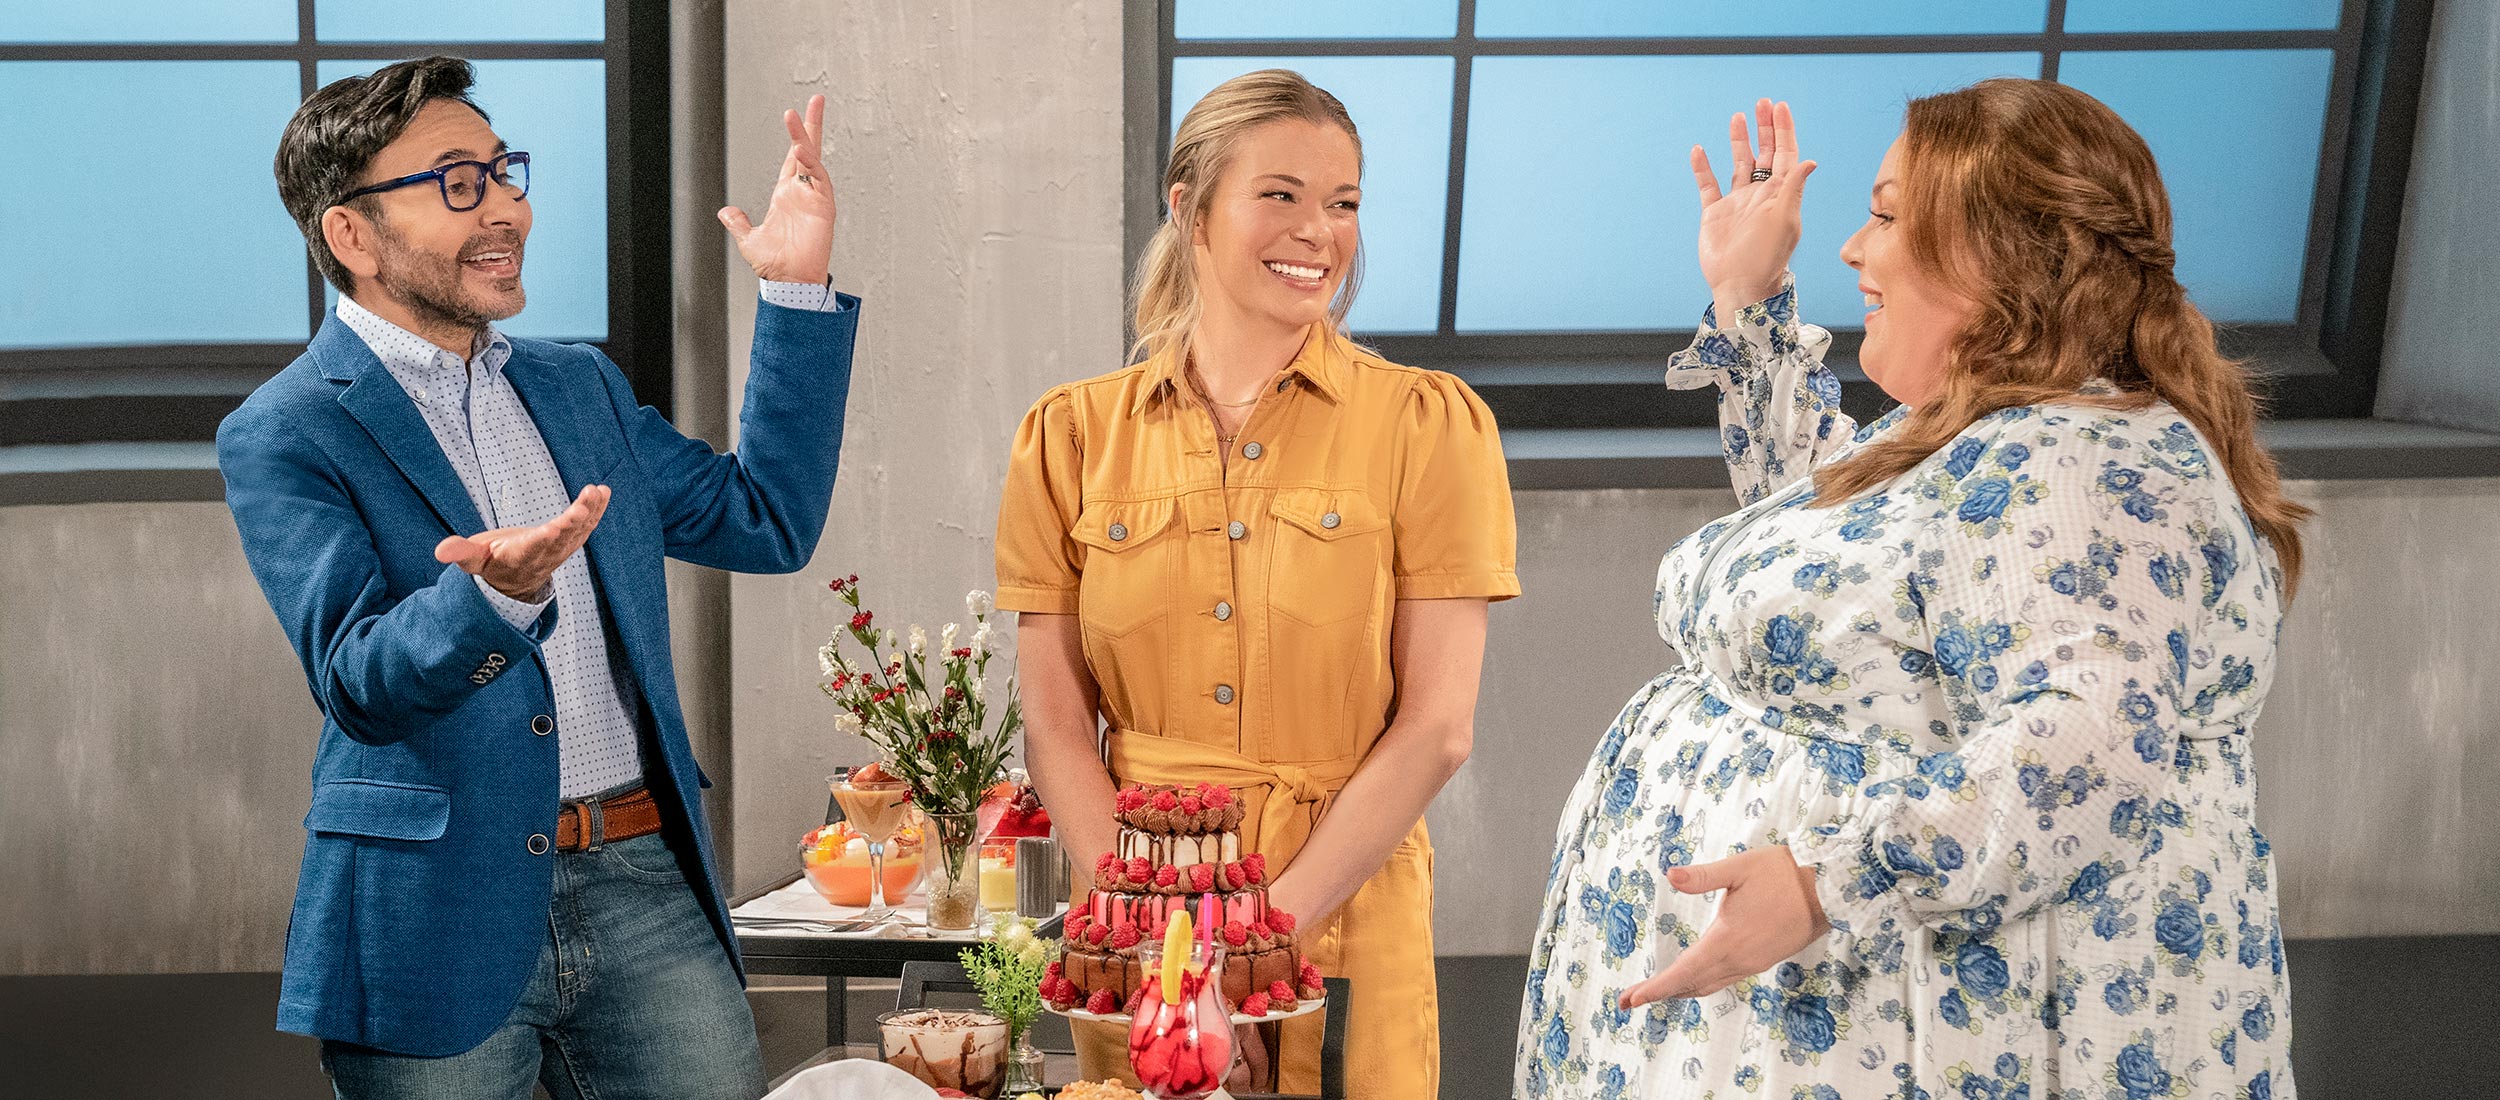 Crafty Competition Series 'Meet Your Makers Showdown' Starring Chrissy Metz  and Leann Rimes Available to Stream Saturday, Nov. 27 on discovery+